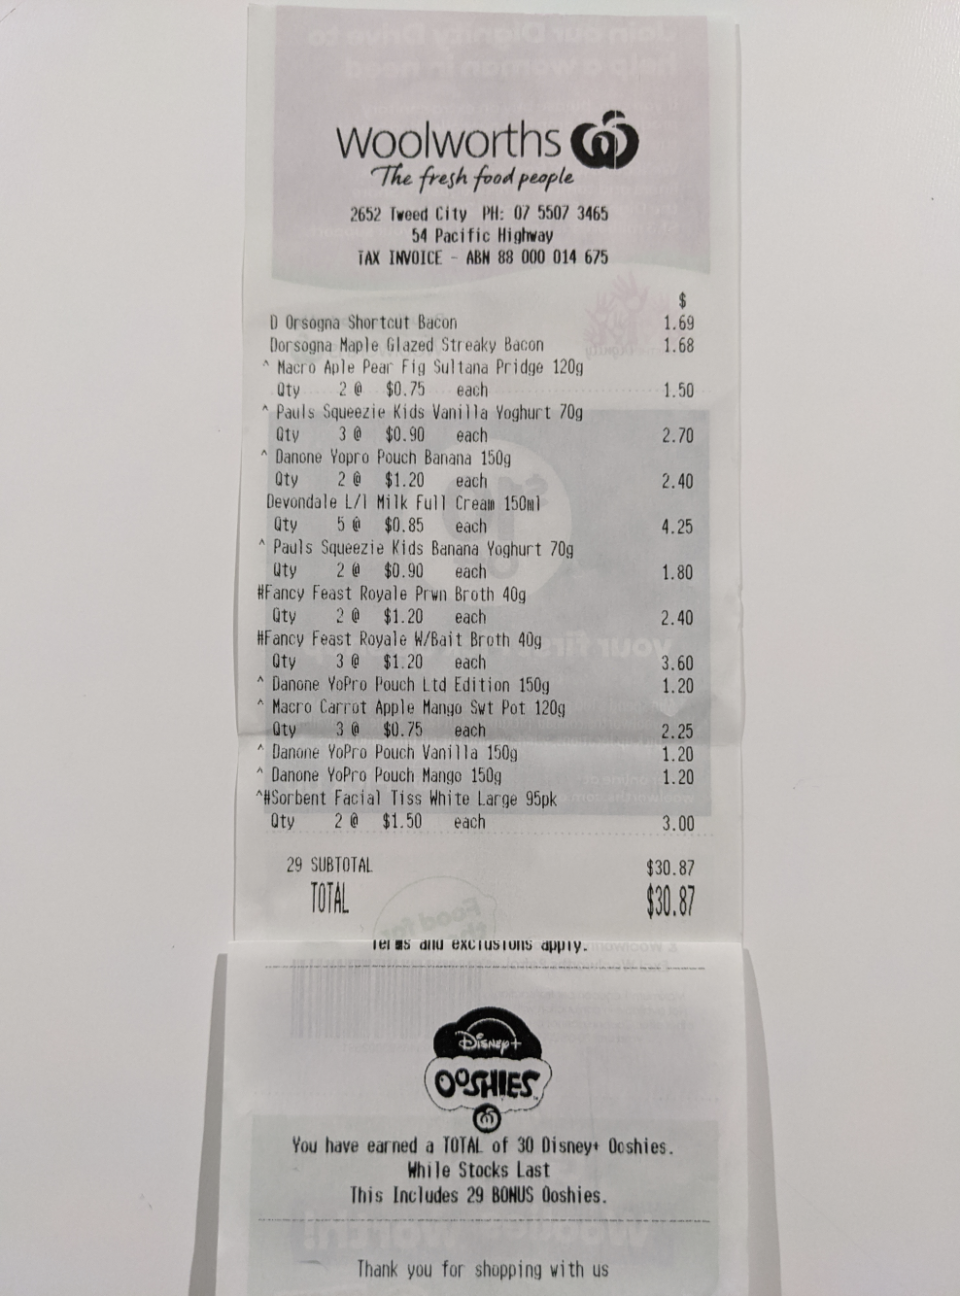 Photo shows a receipt from a woman's Woolworths shop that earned 30 Ooshies.